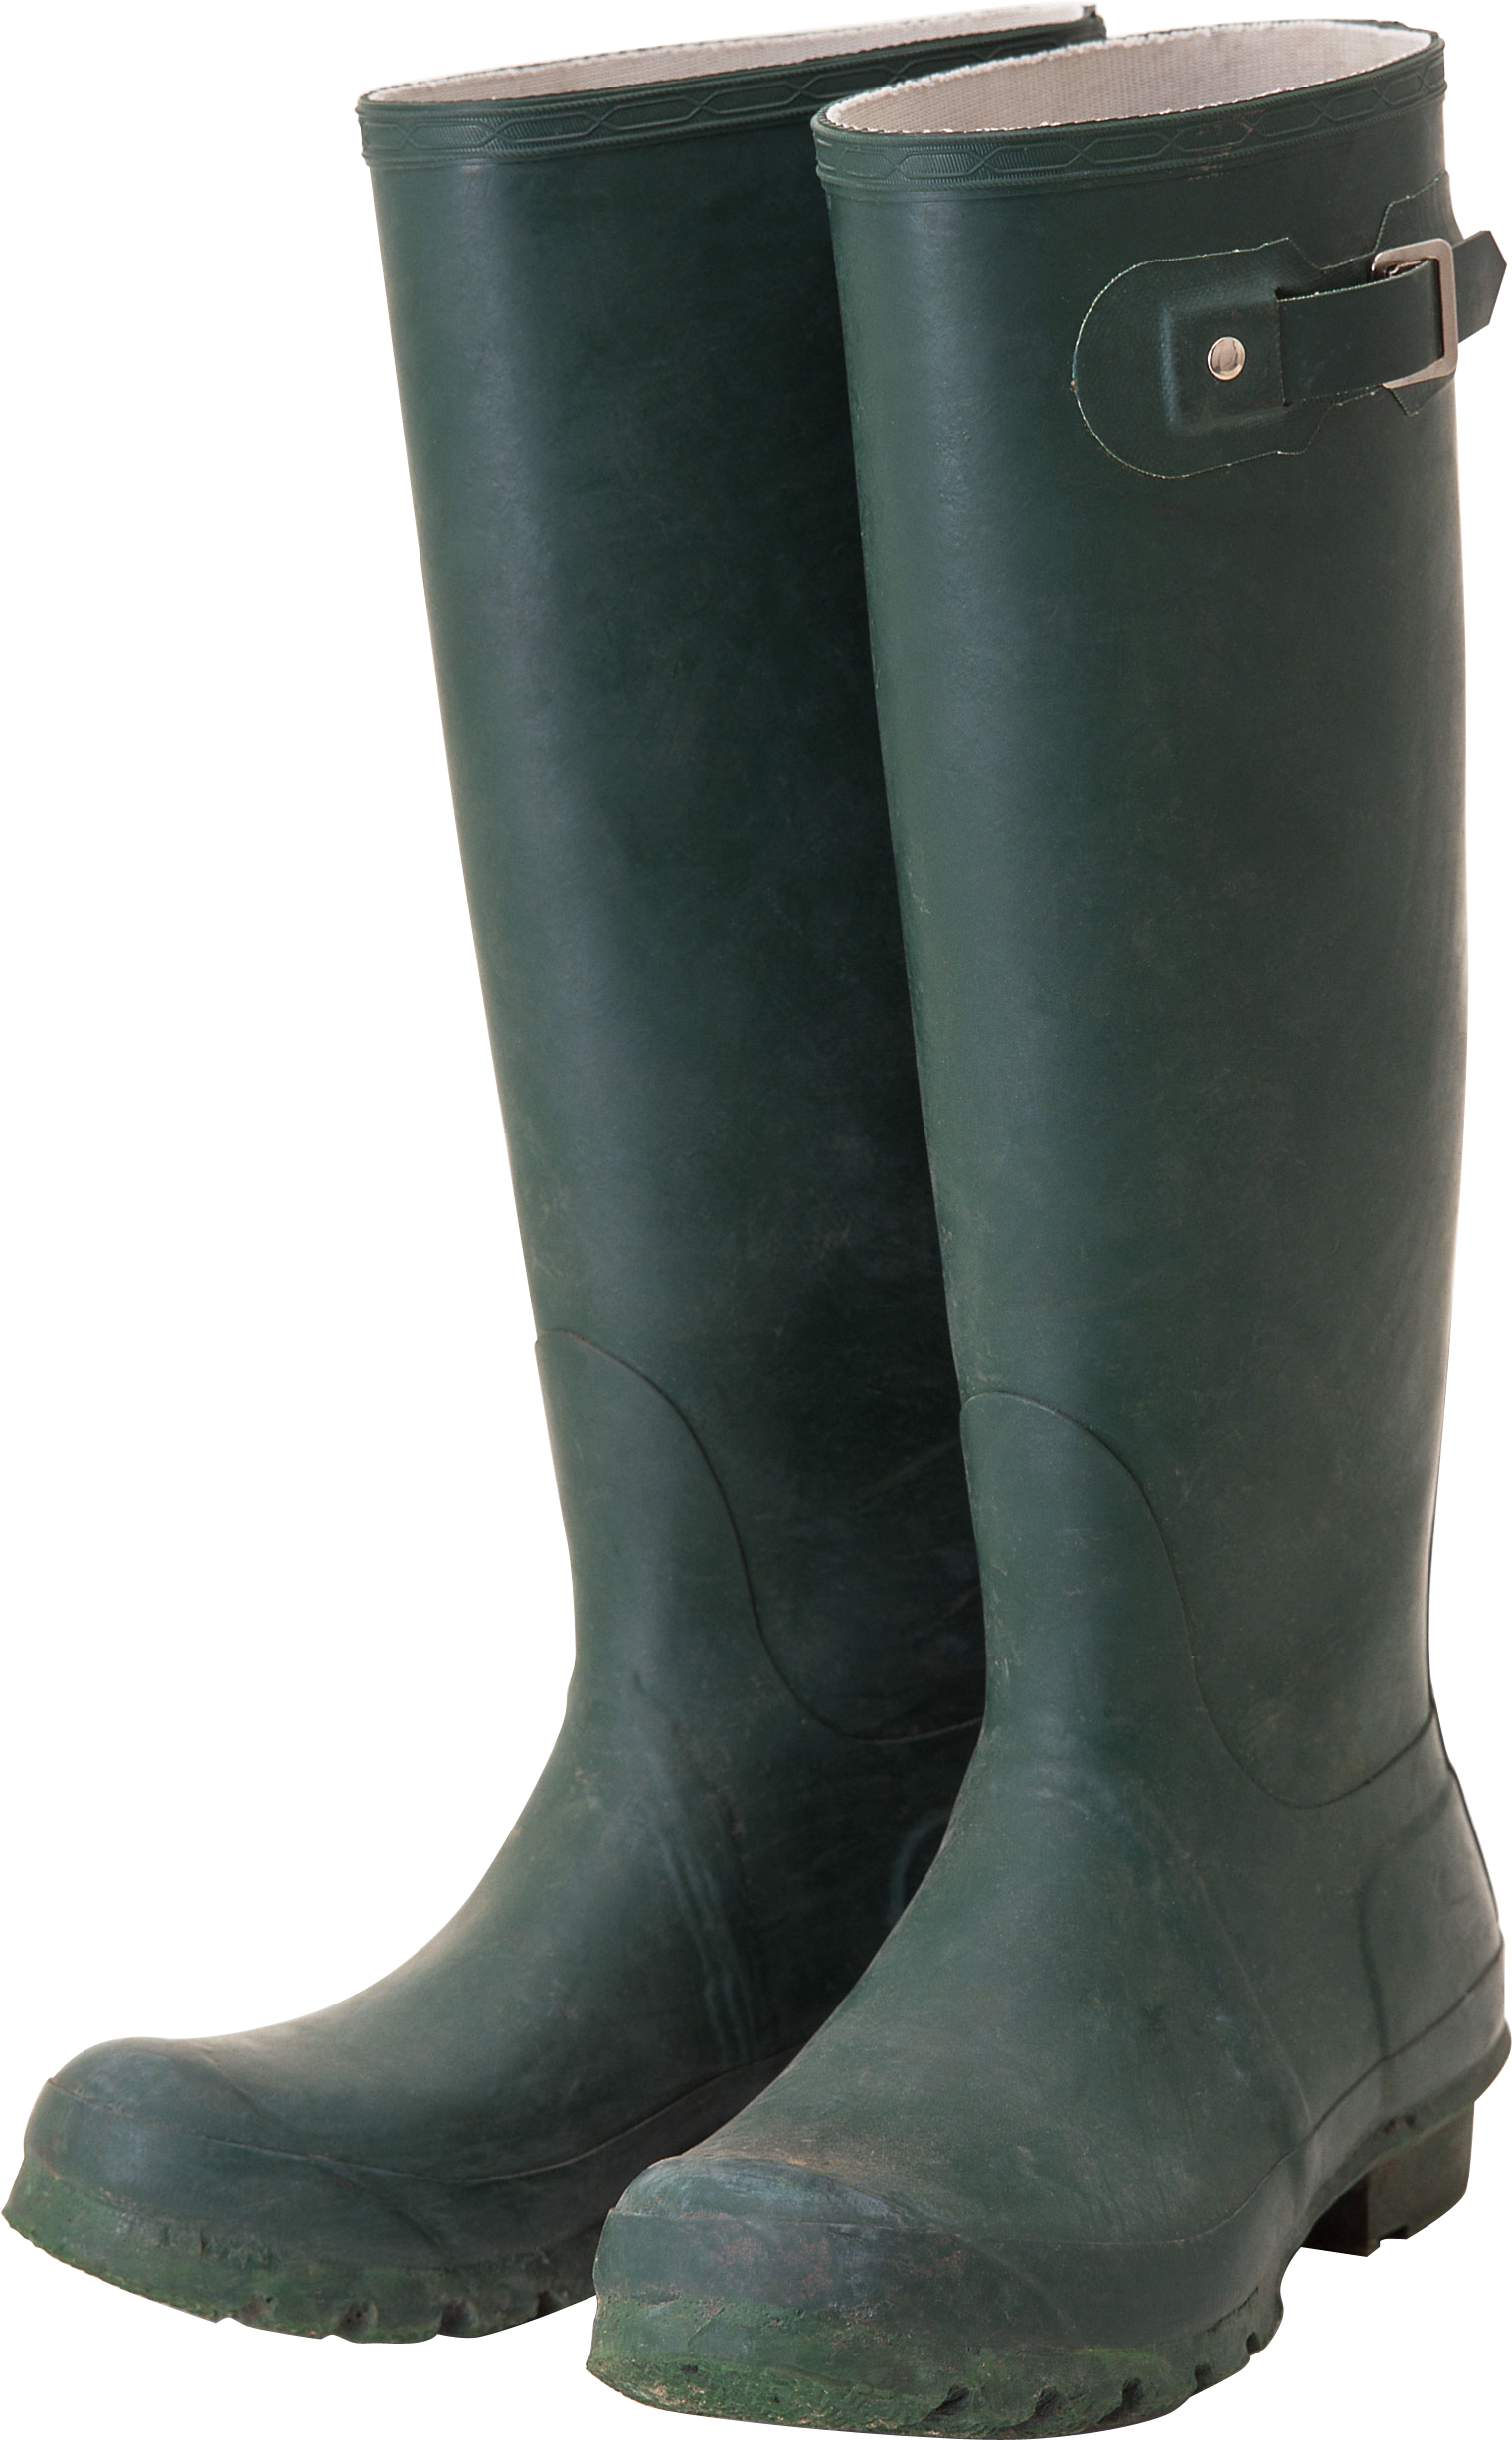 Best wellington boots: The be